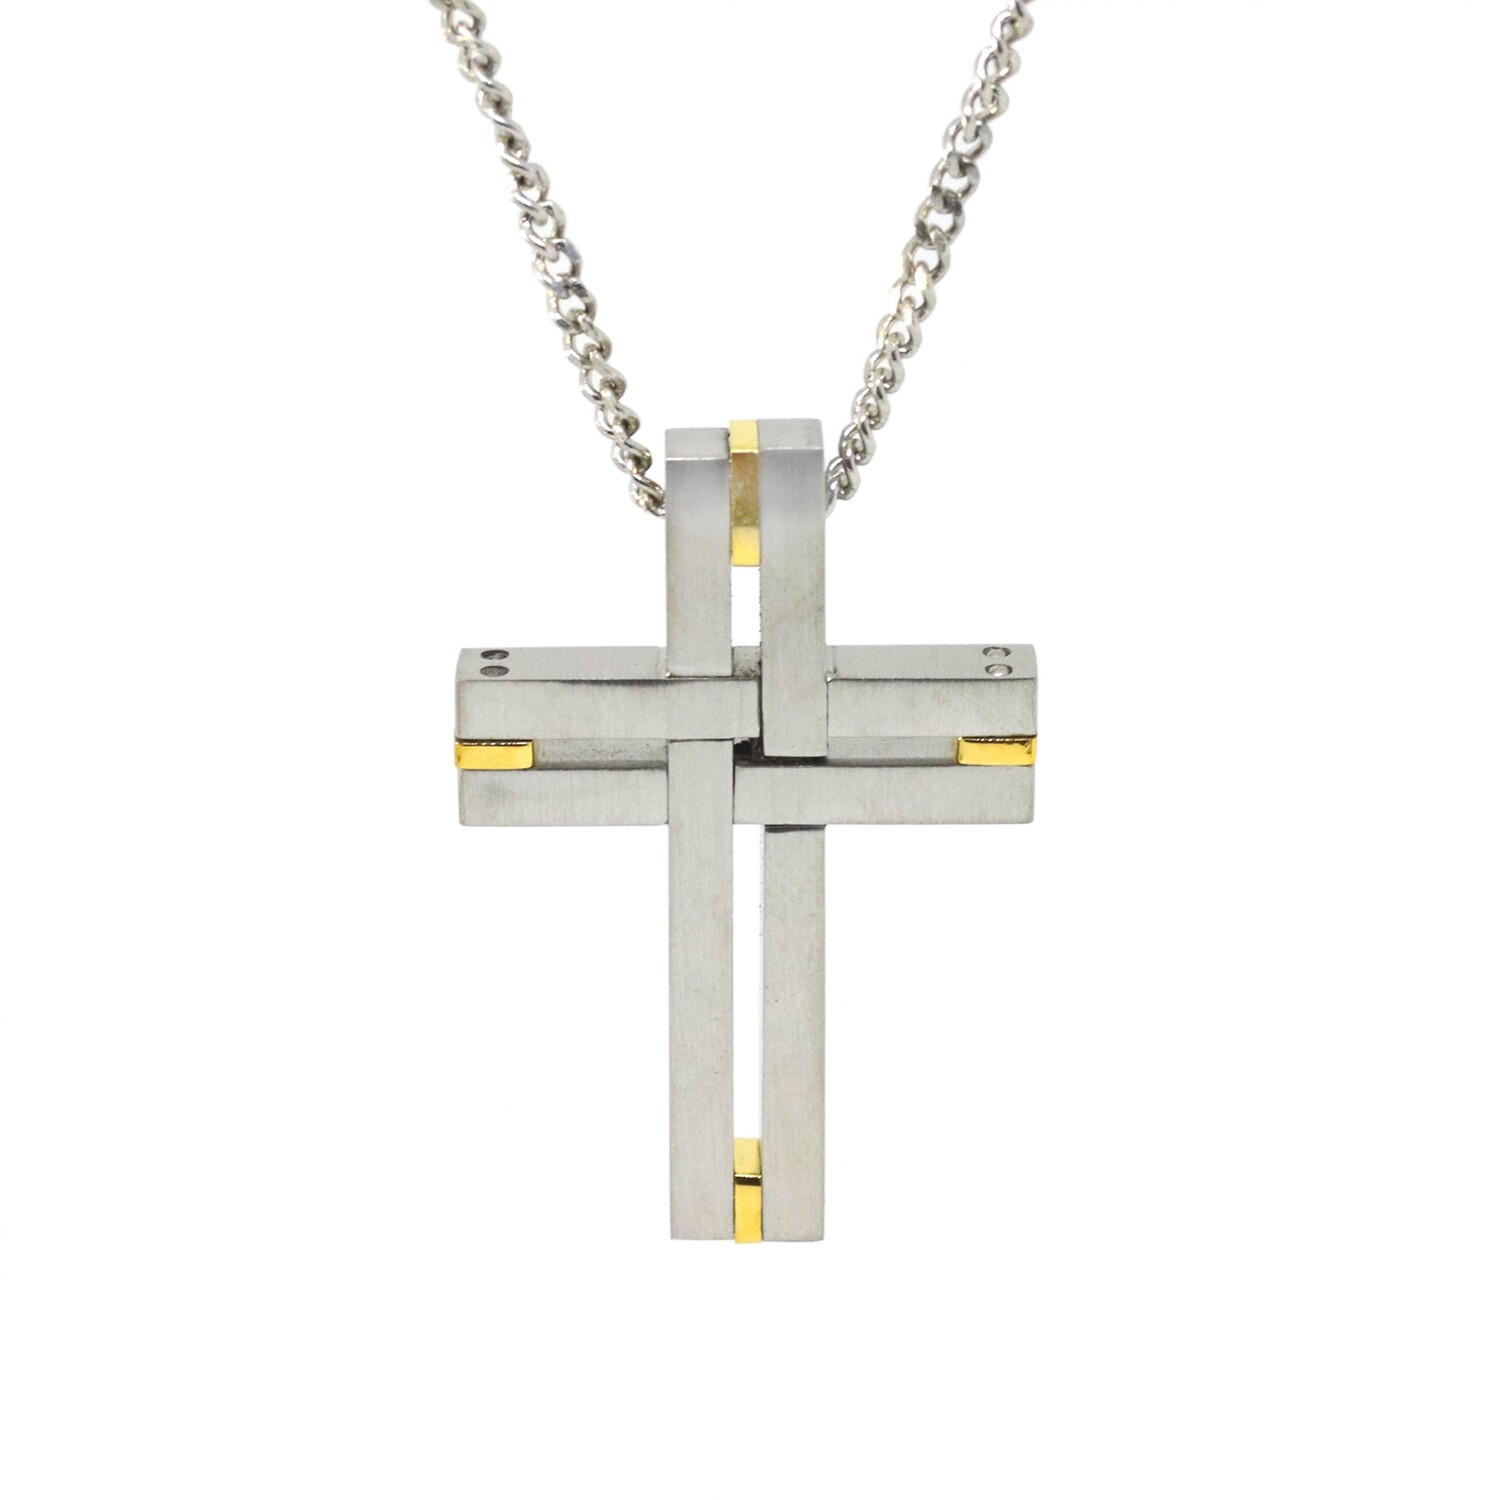 Stainless Steel Cross Necklace Pendant for Men and Women 16-24